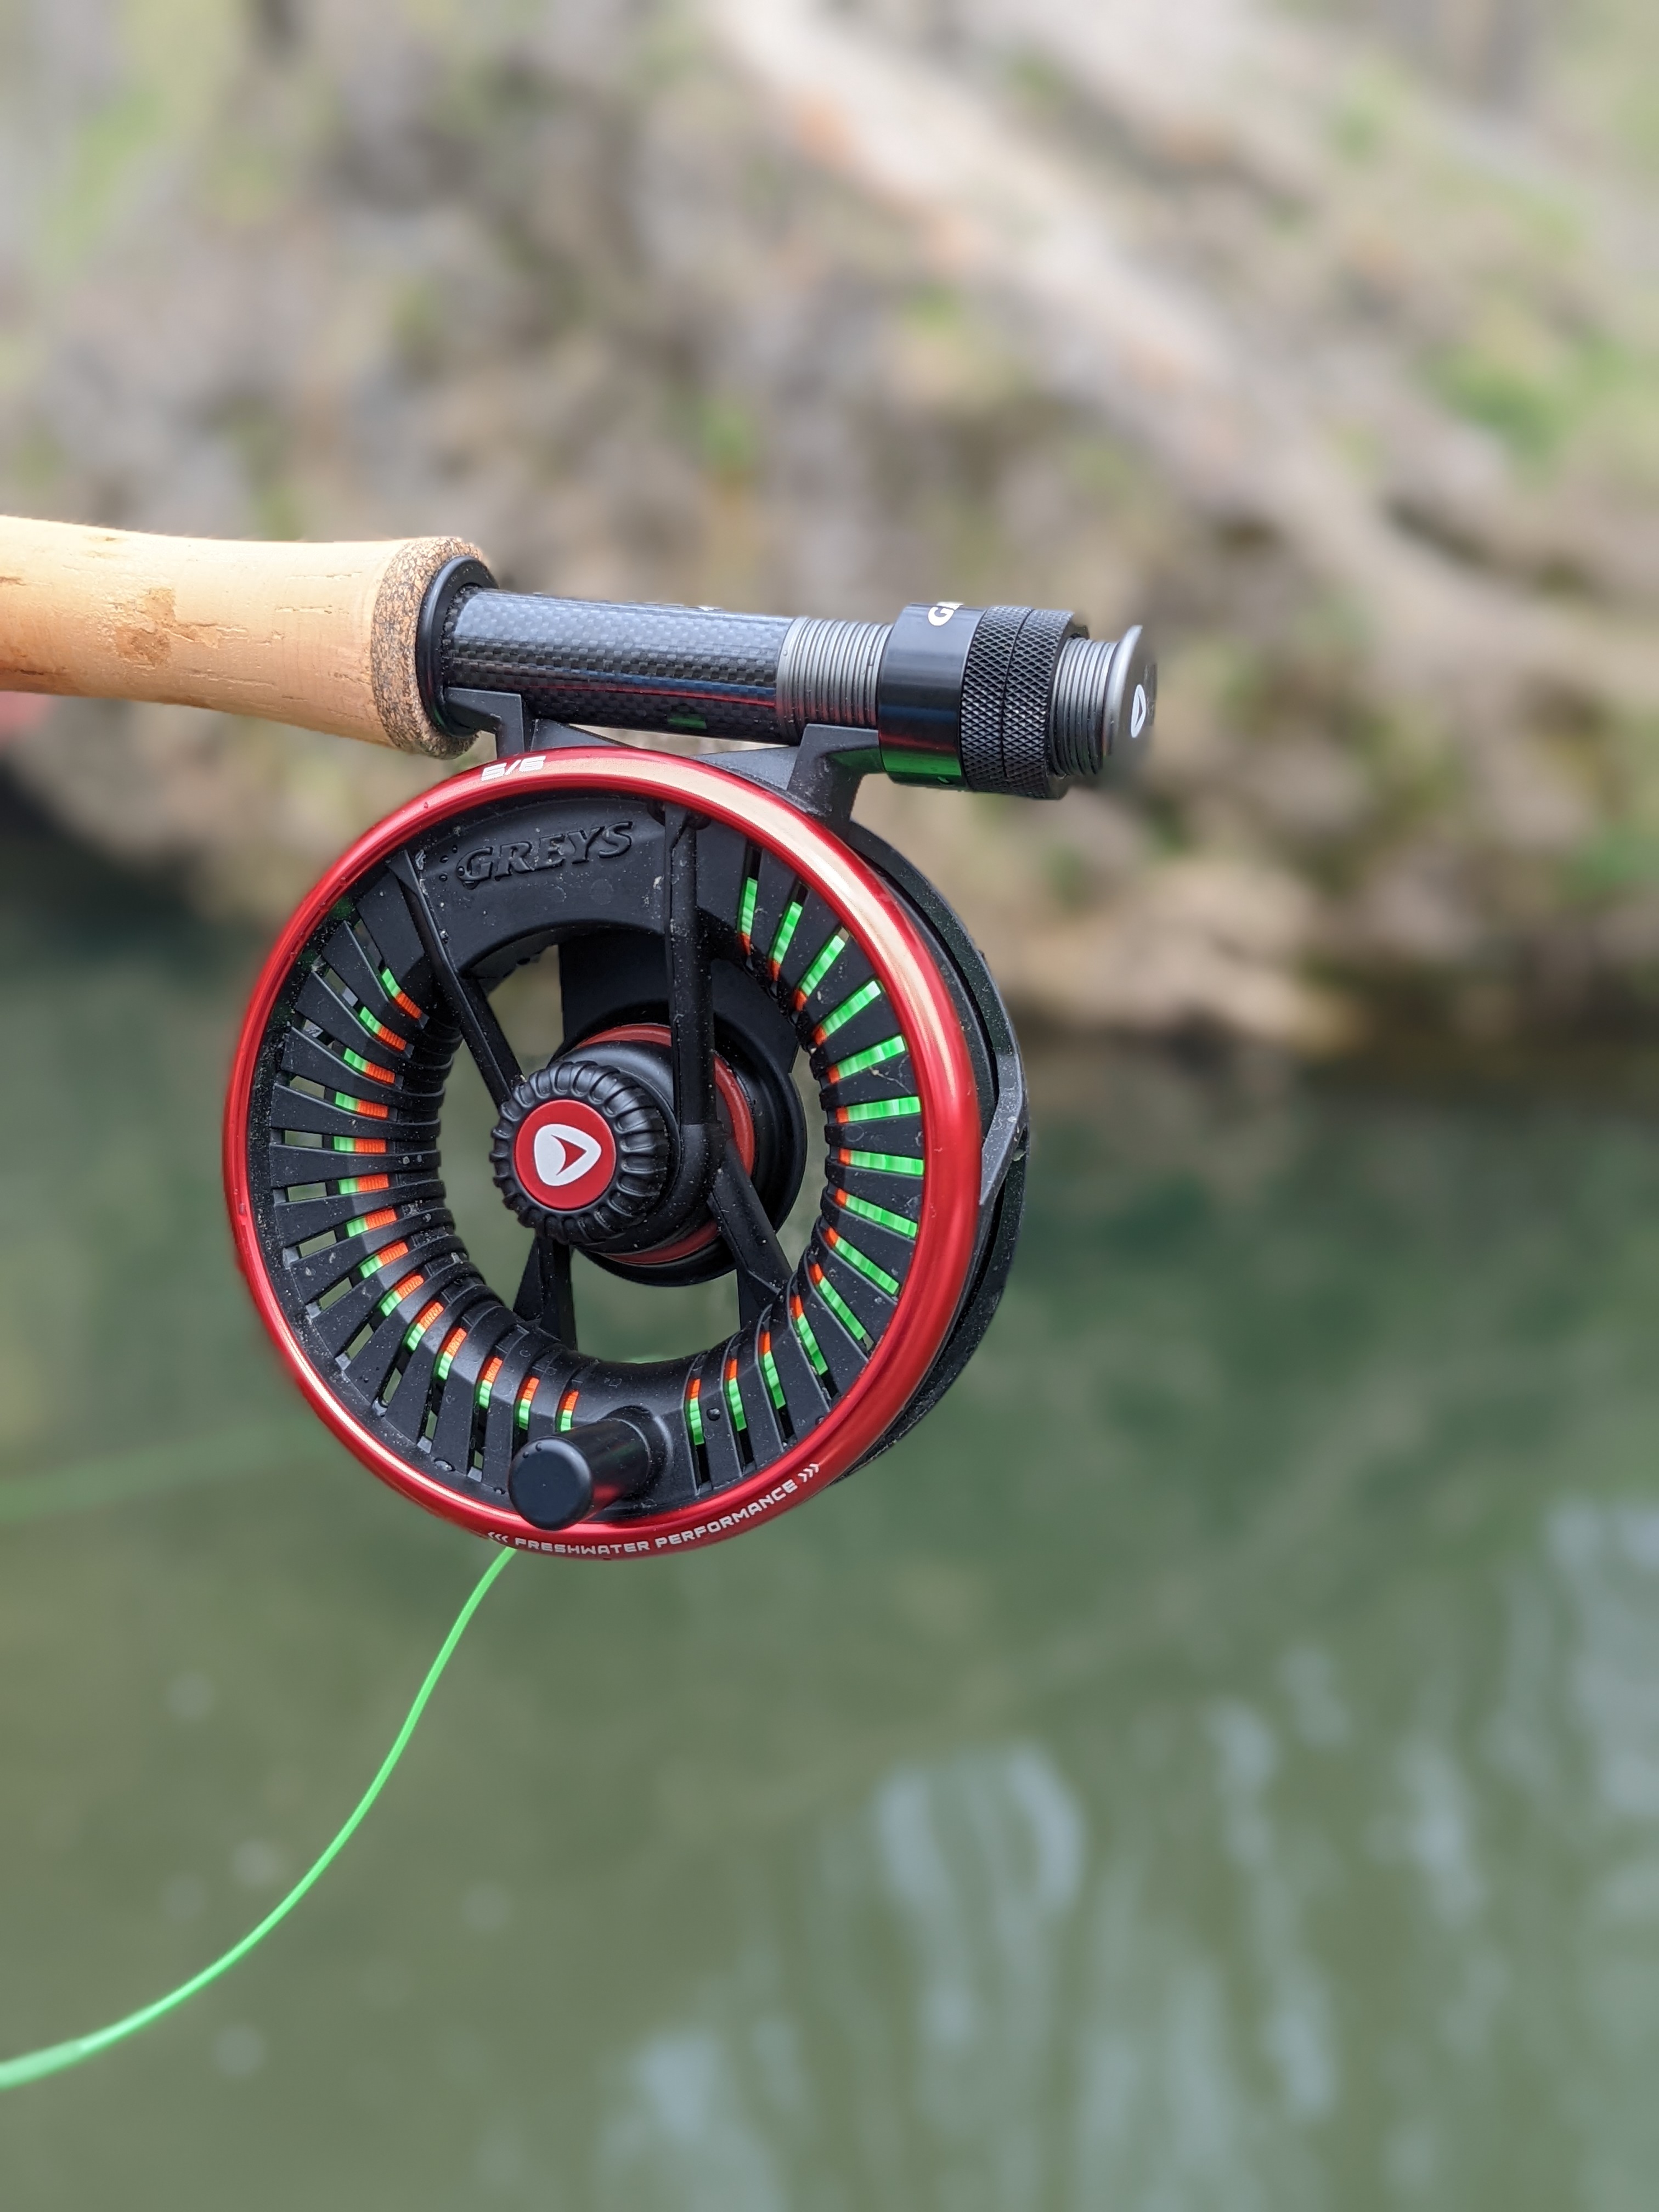 Greys Fly Fishing Set Up Review